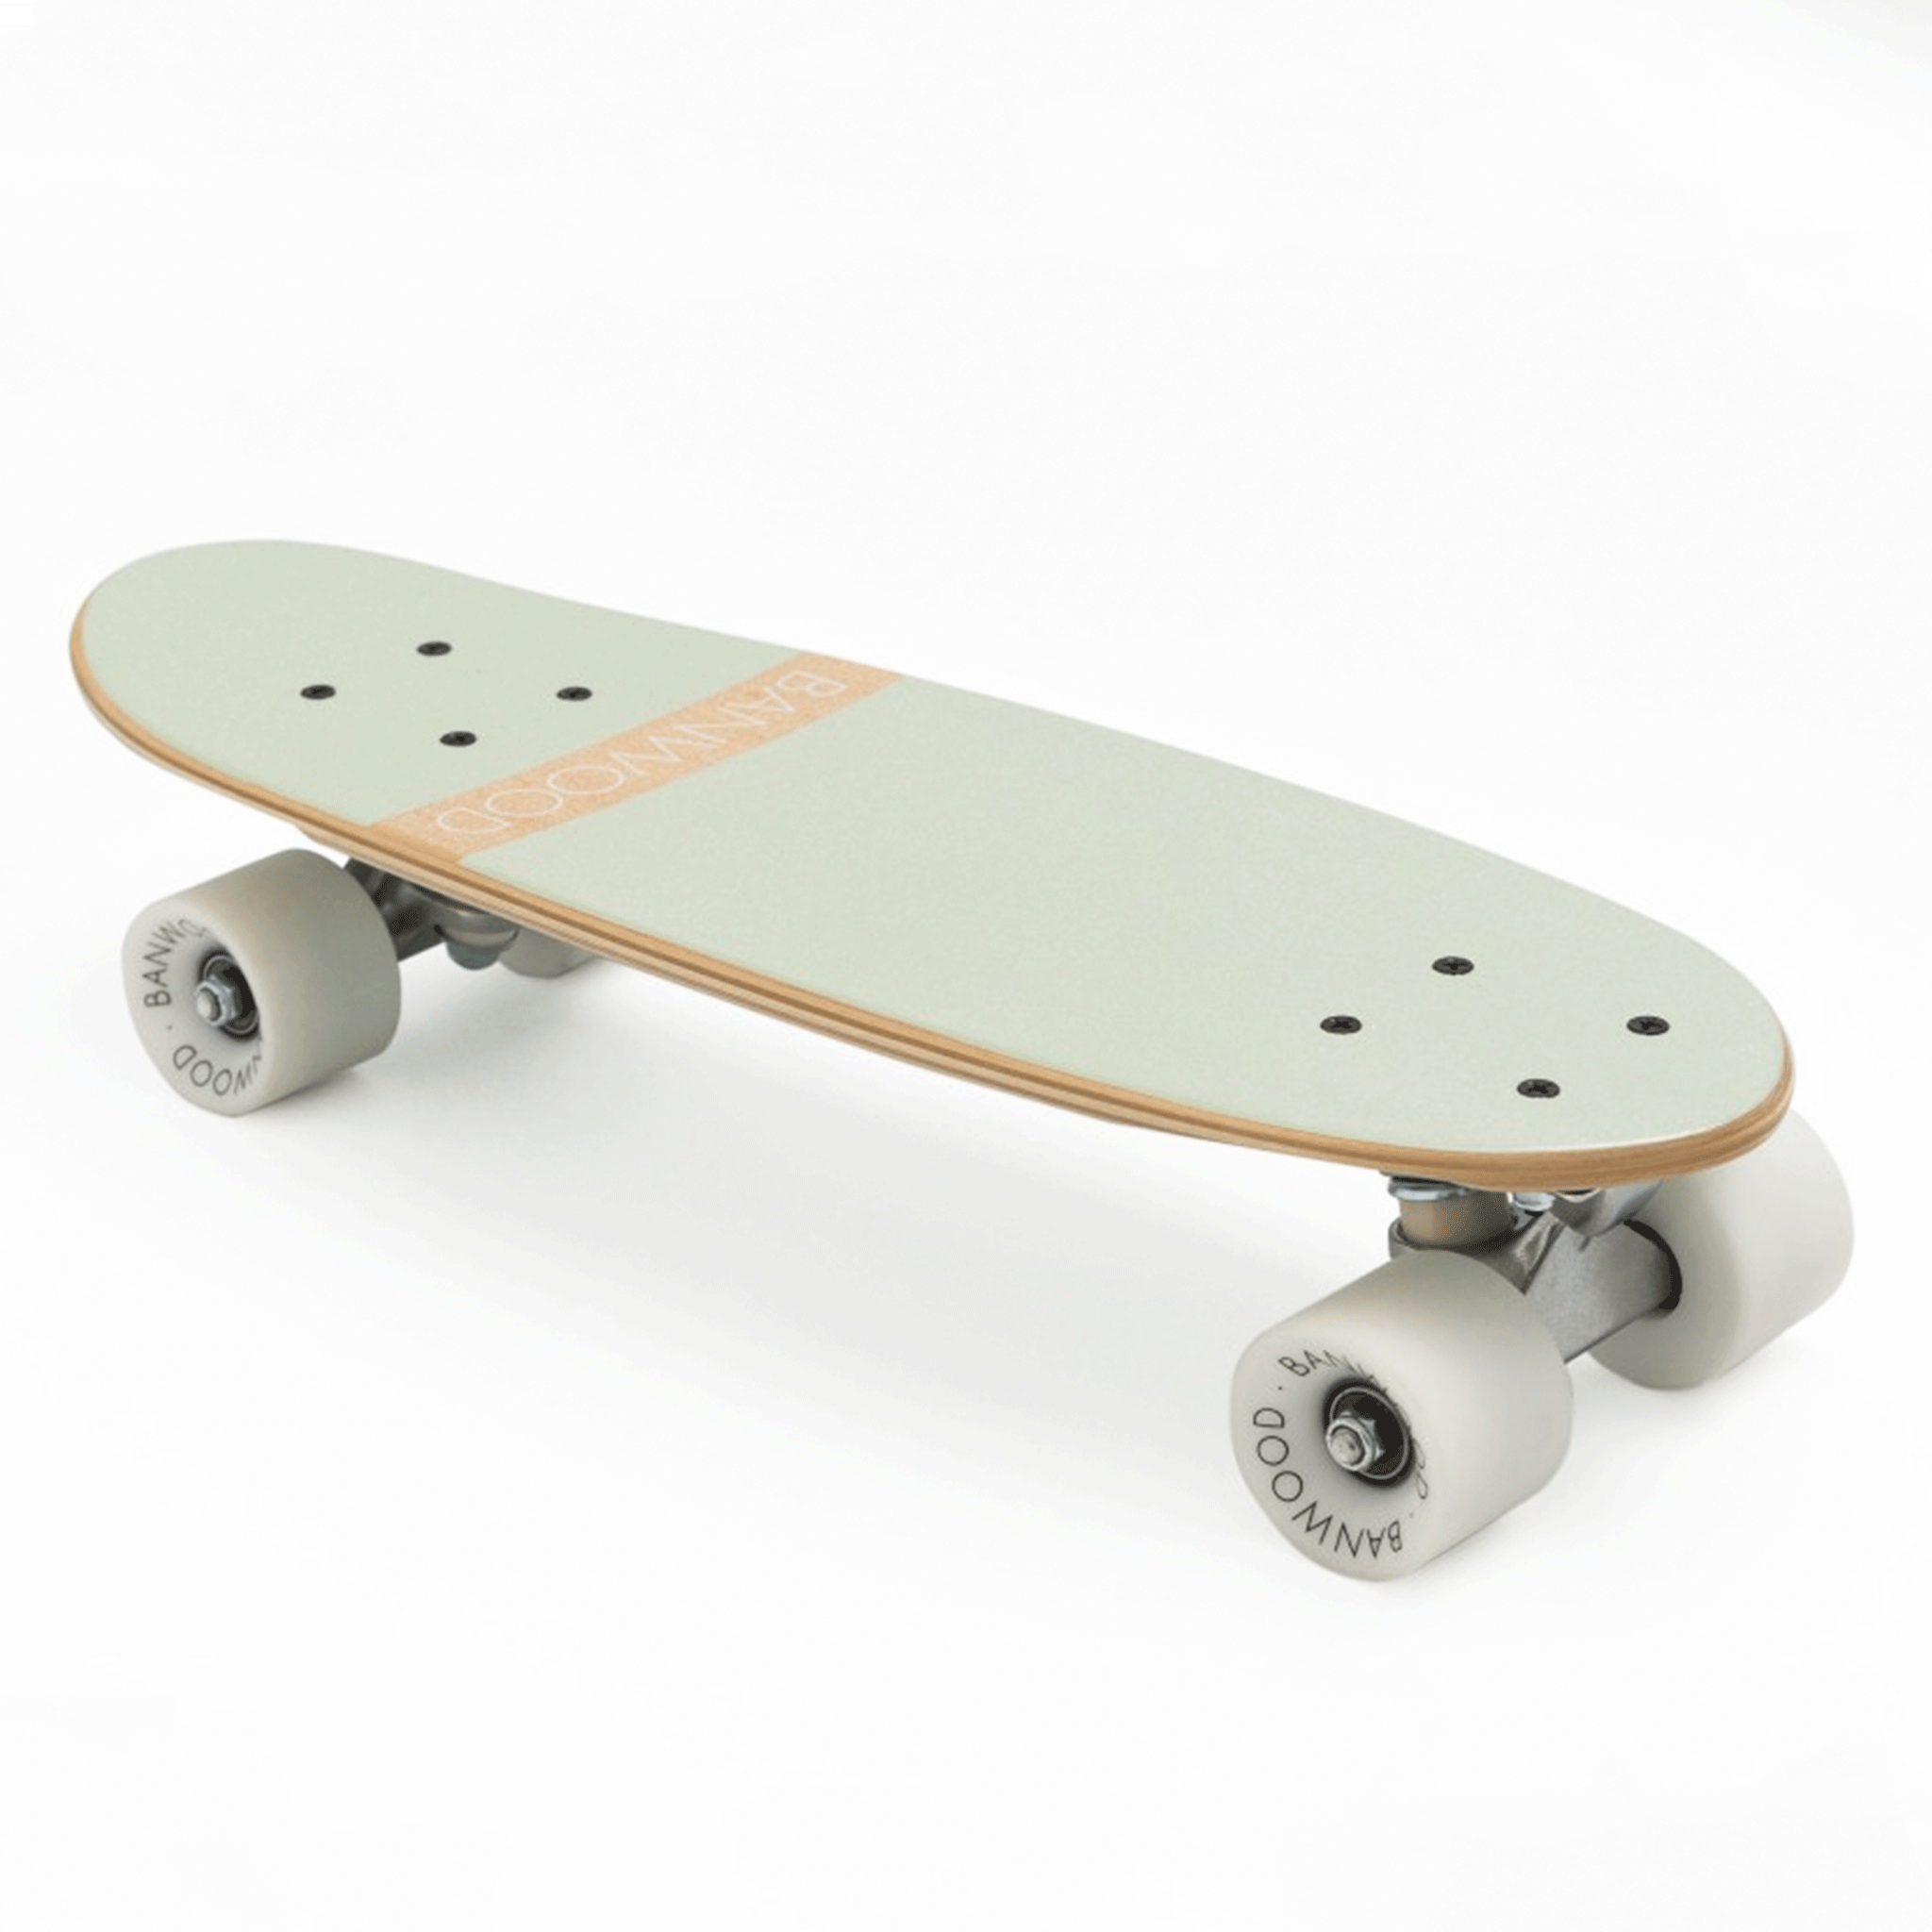 On a white background is a mint colored skateboard with white wheels.